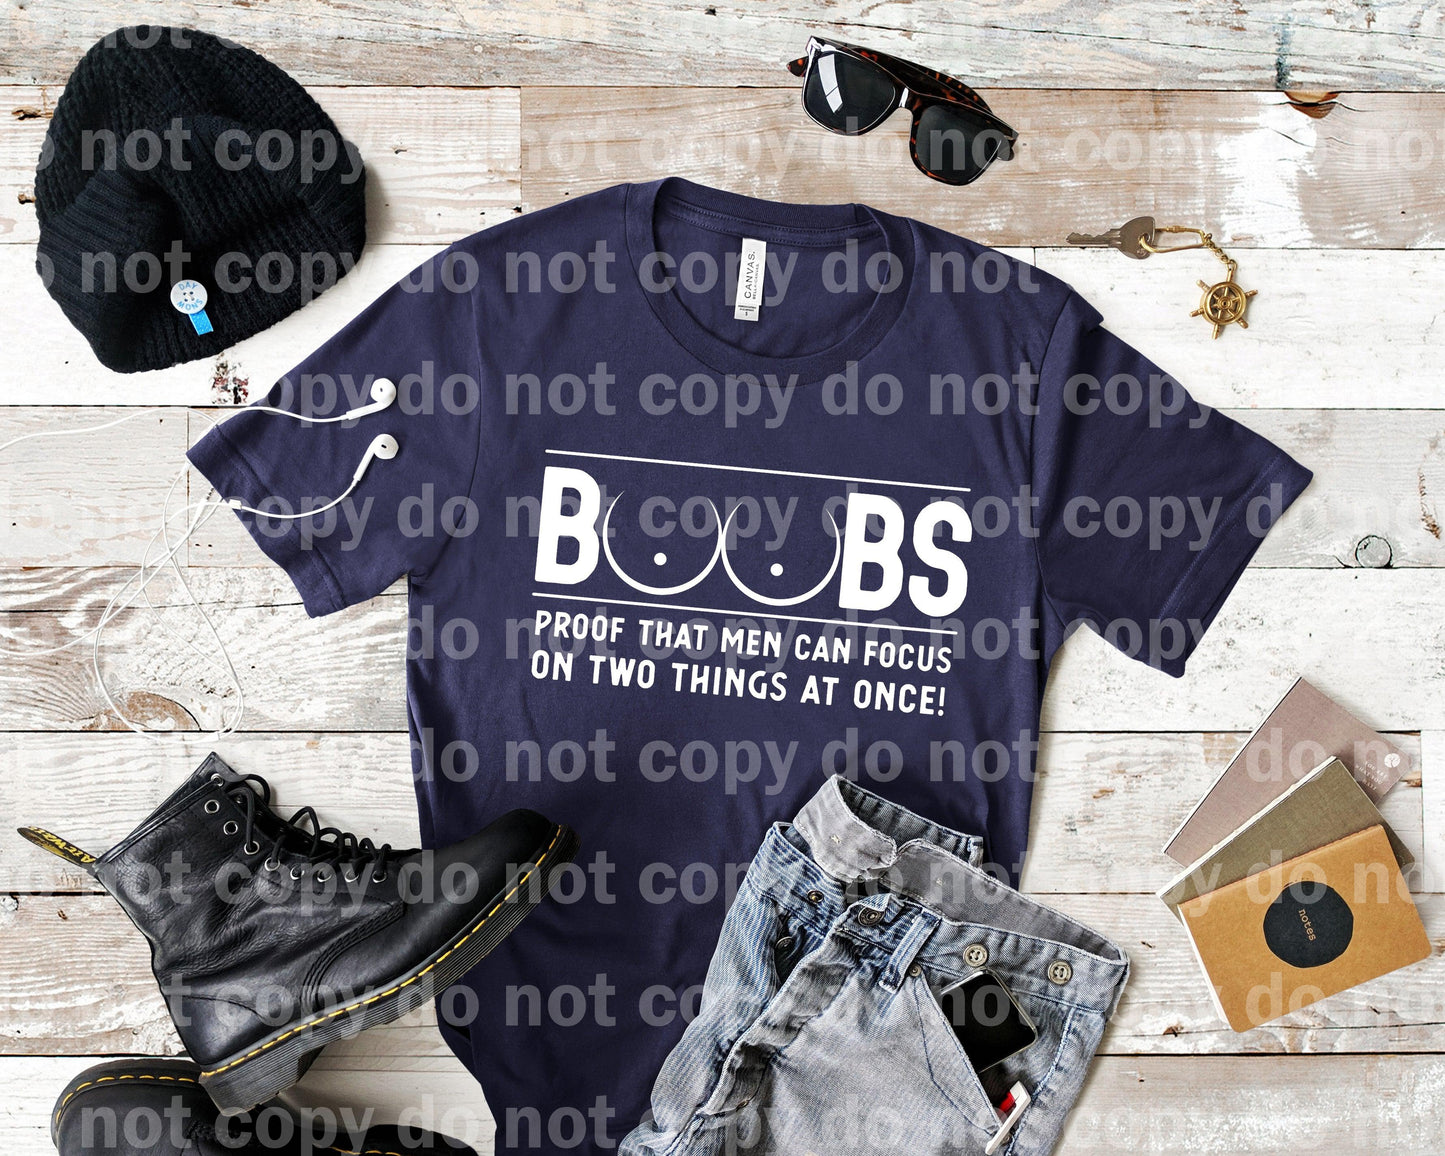 Boobs Proof That Men Can Focus On Two Things At Once Black/White Dream Print or Sublimation Print